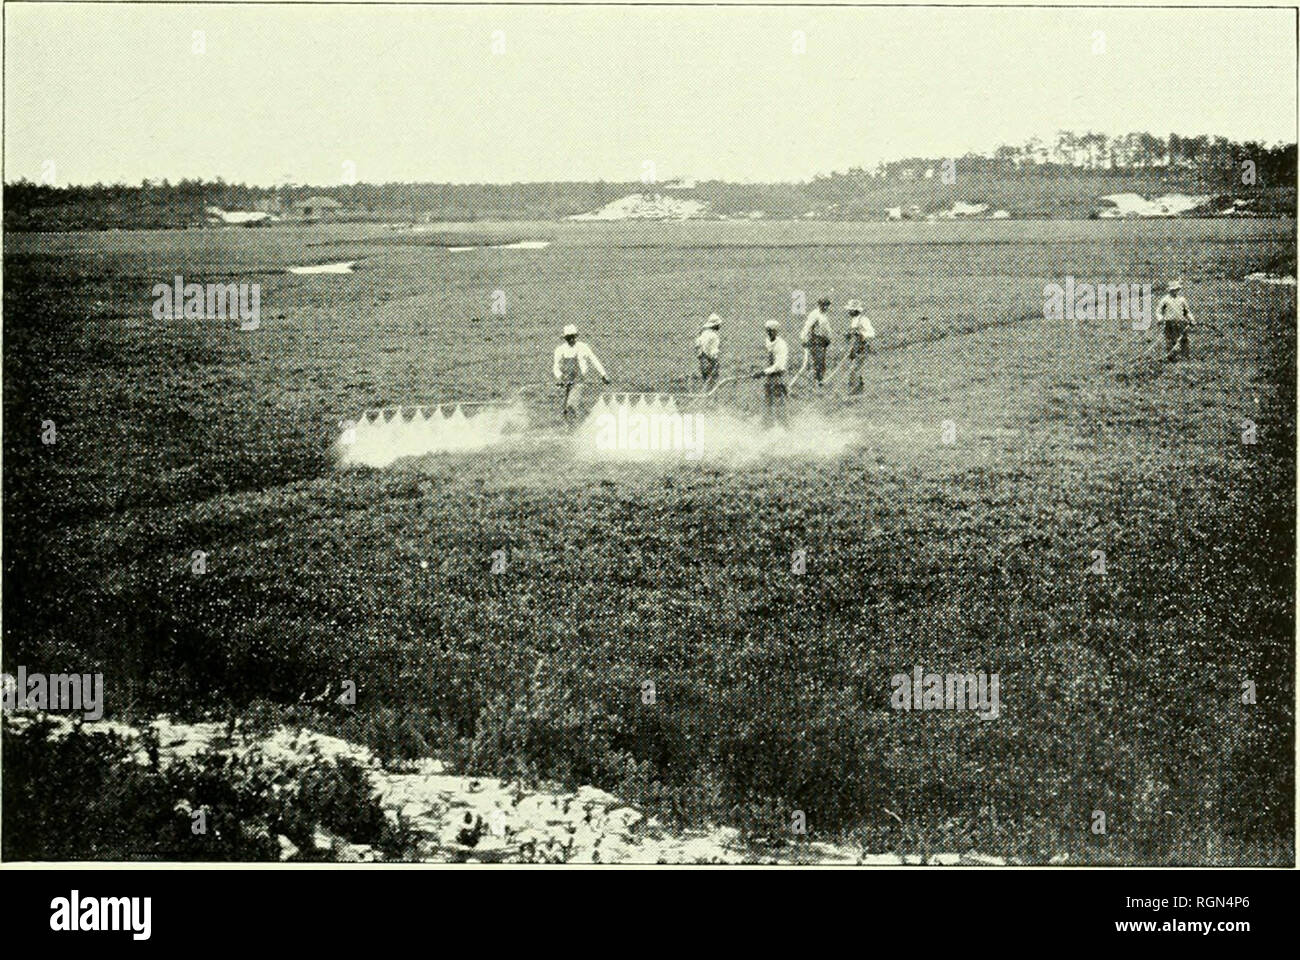 . Bulletin - Massachusetts Agricultural Experiment Station. Agriculture -- Massachusetts. CRANBERRY GROWING 31 The fruit worm (Fig. 24) lias taken an estimated third of tlie whole Cape crop in some years. It may be checked by holding the winter flow- age till late May or by spraying or dusting late in the blossoming period and again 10 days later with derris or cryolite. The black-headed fireworm (Fig. 25 A) seldom harms strictly dry bogs much. It was formerly treated largely by flooding in late May or early June. This is usually effective for the time being, but its usual long-range effect is Stock Photo